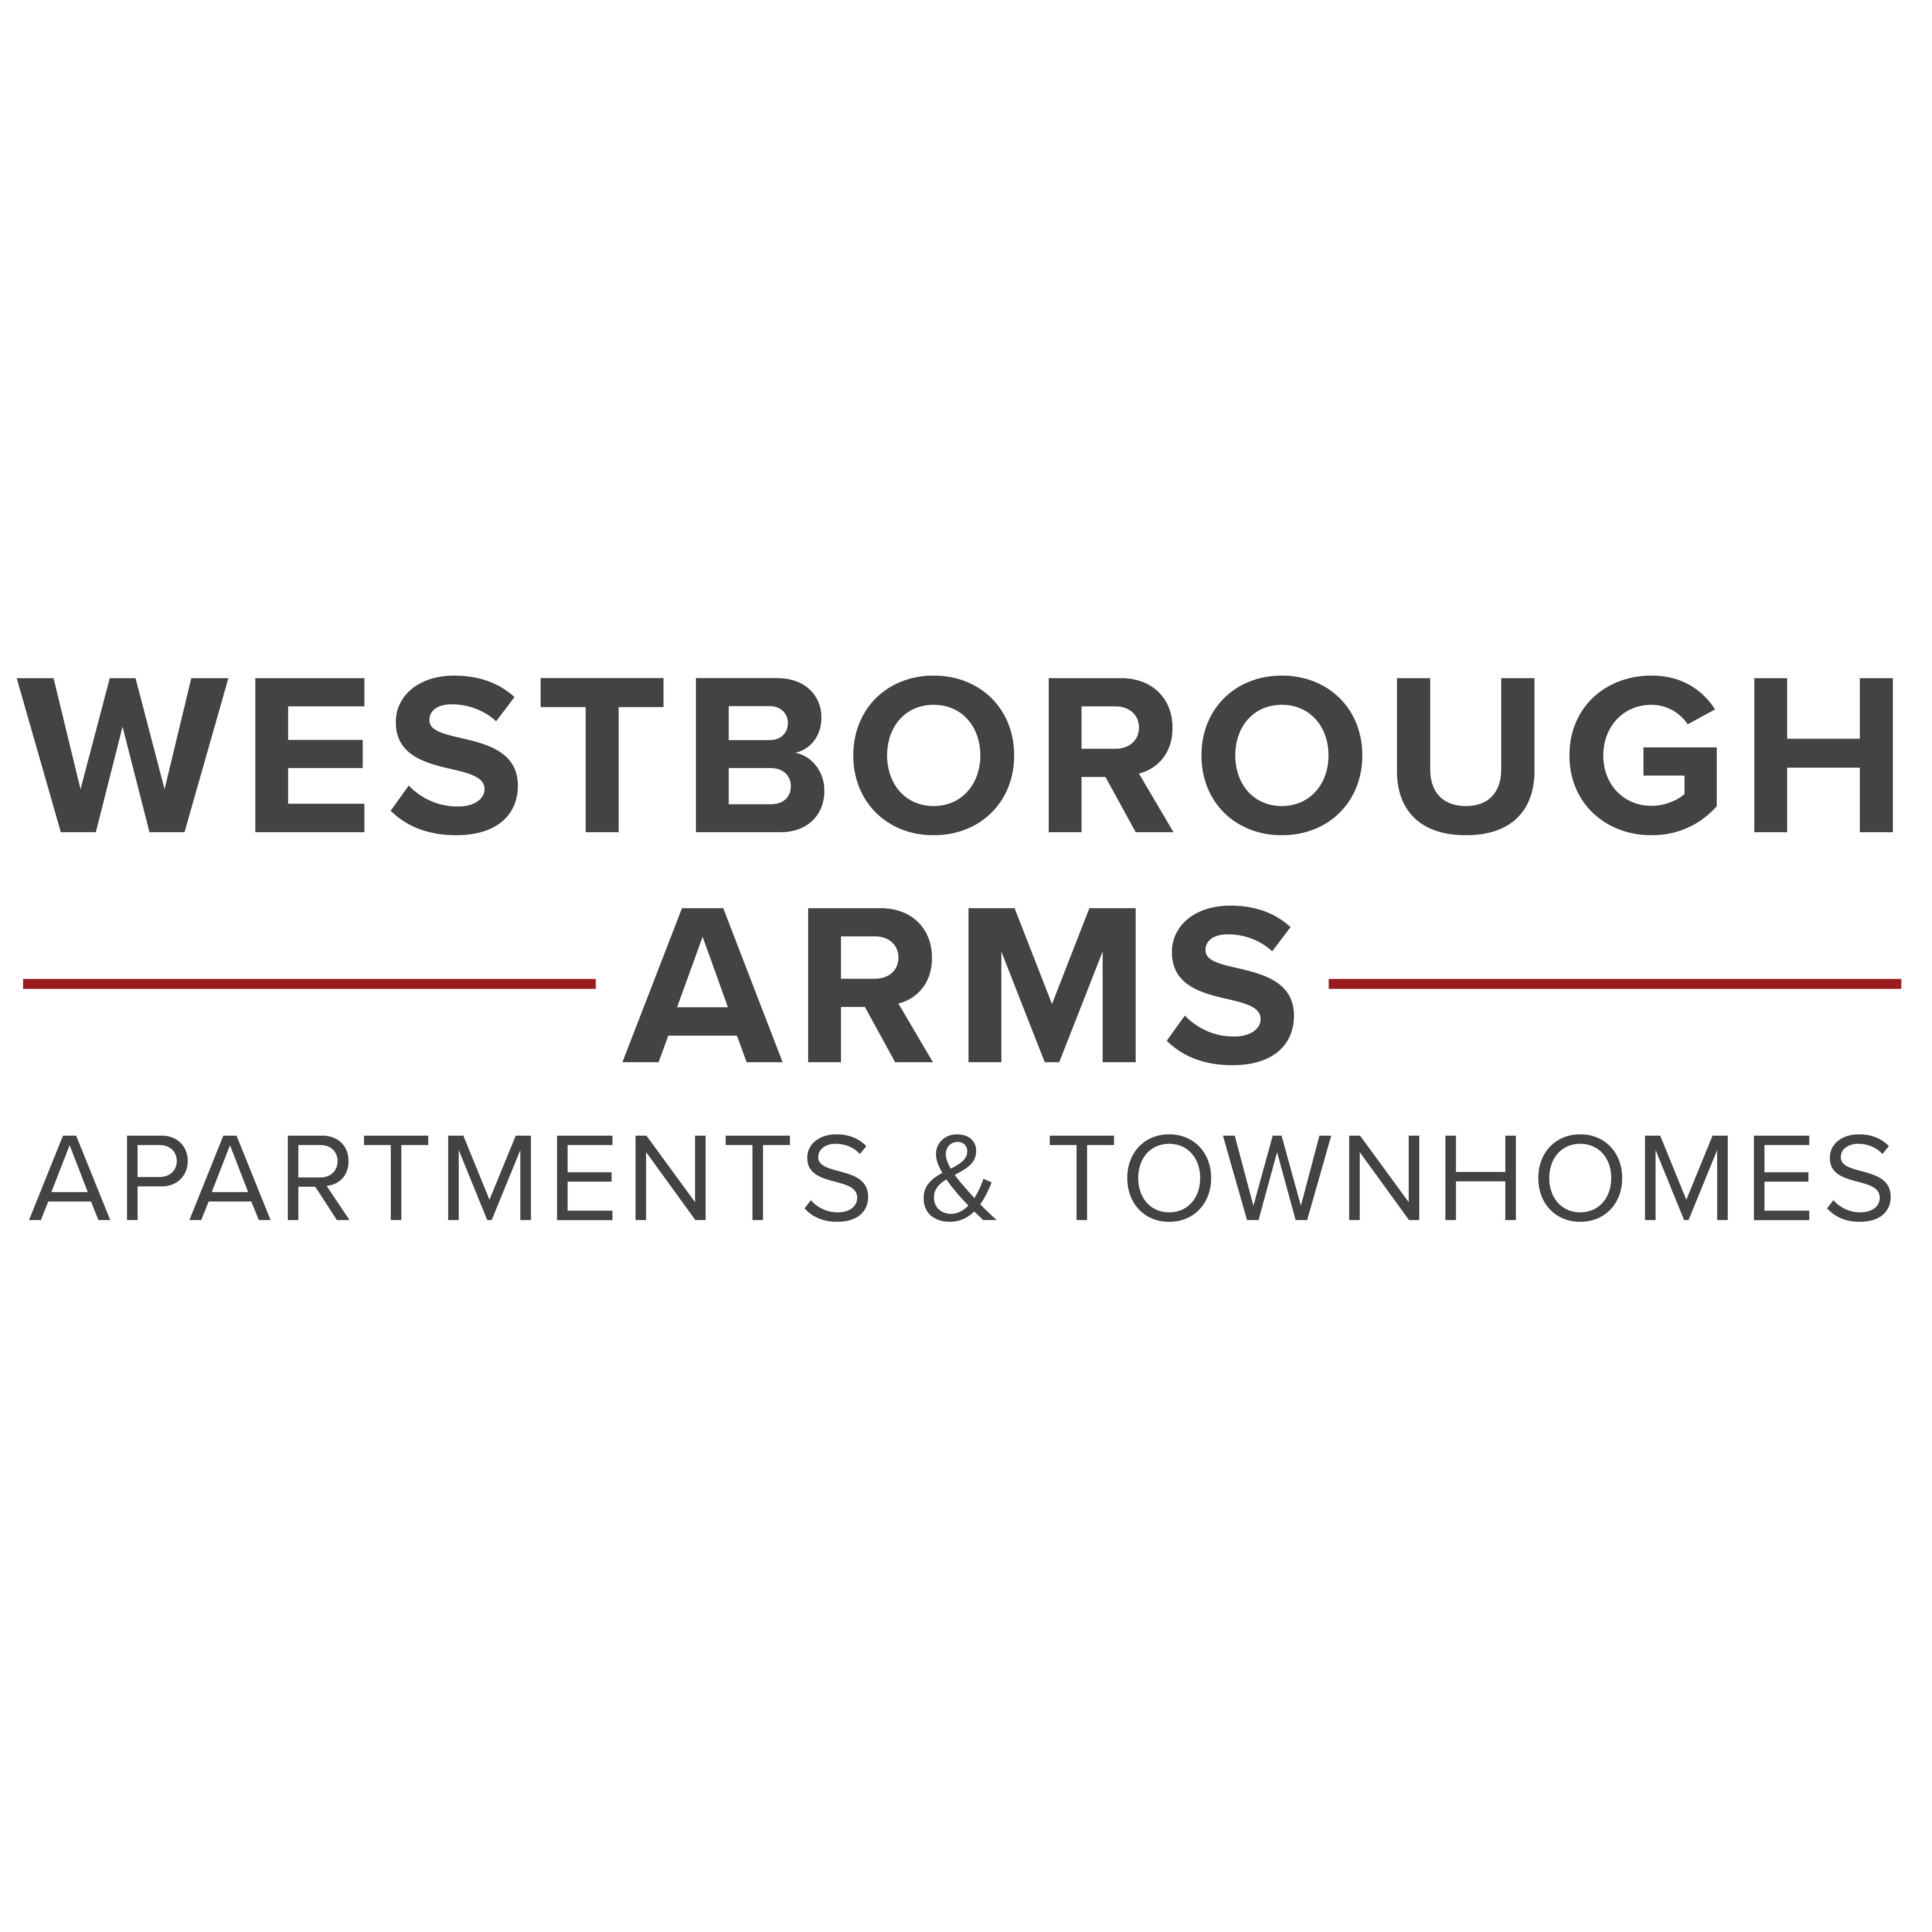 Westborough Arms Apartments and Townhomes